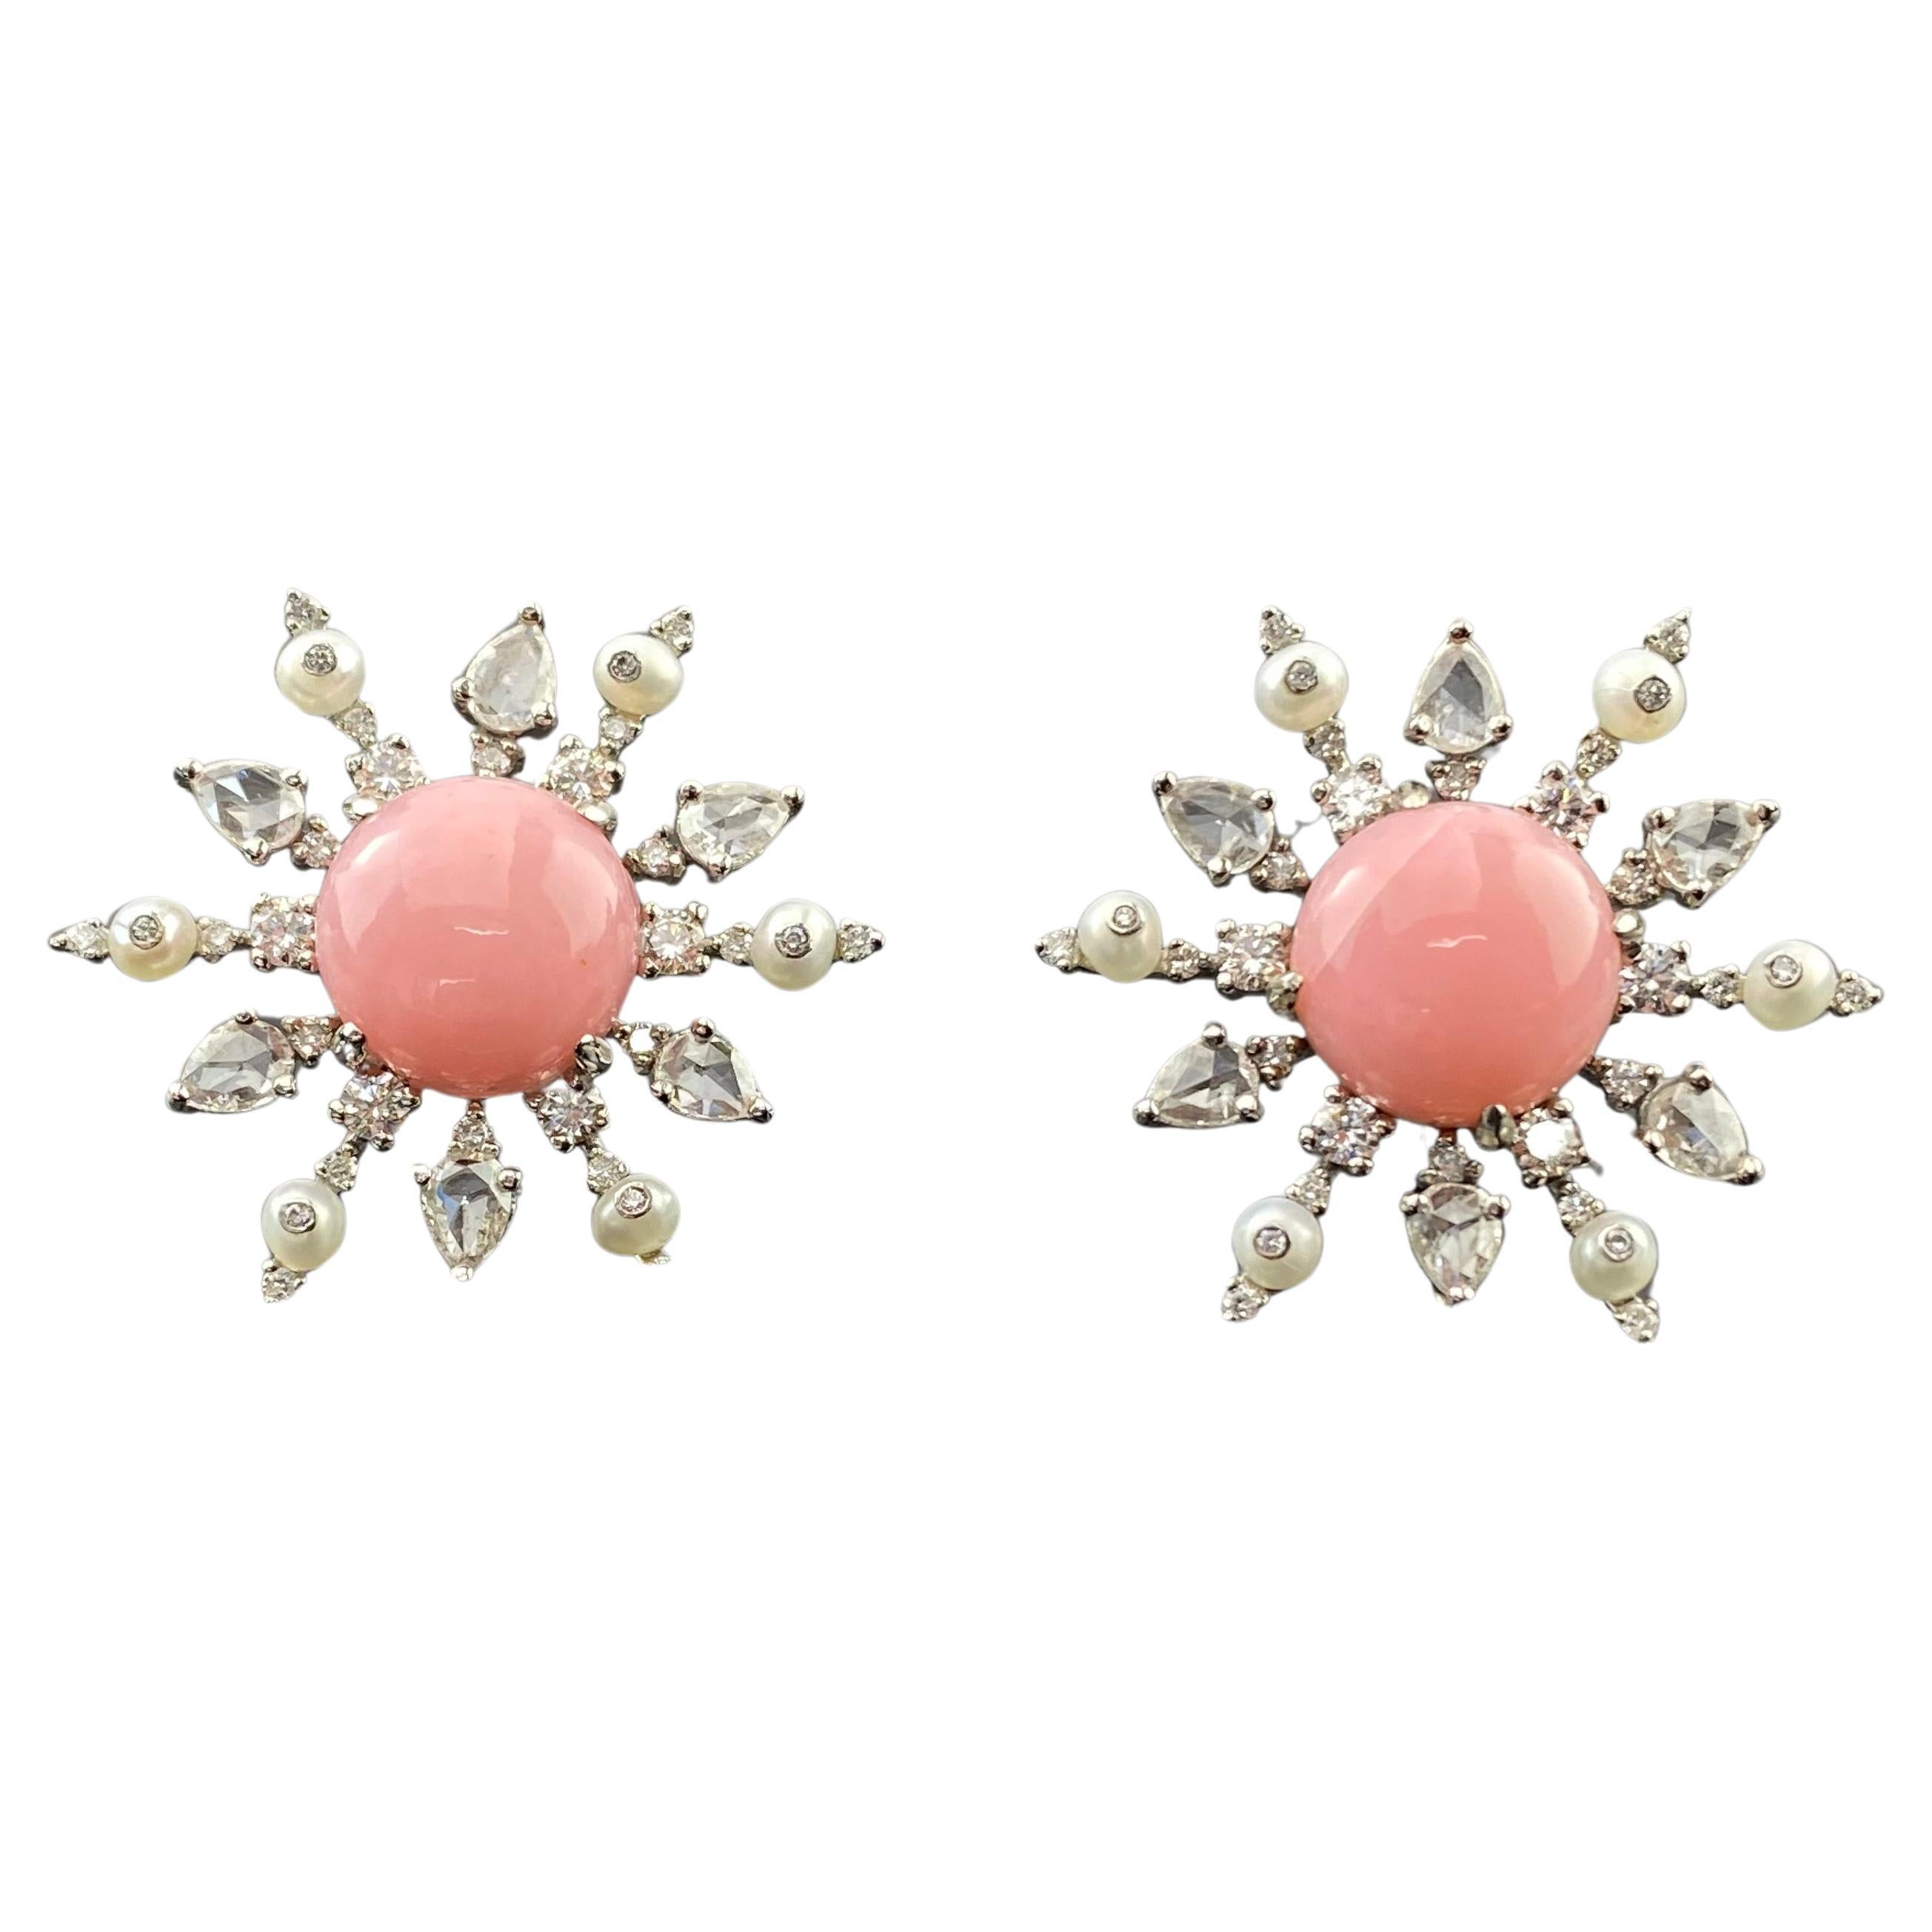 Pink Opal Stud Earrings with Pearls and Diamonds